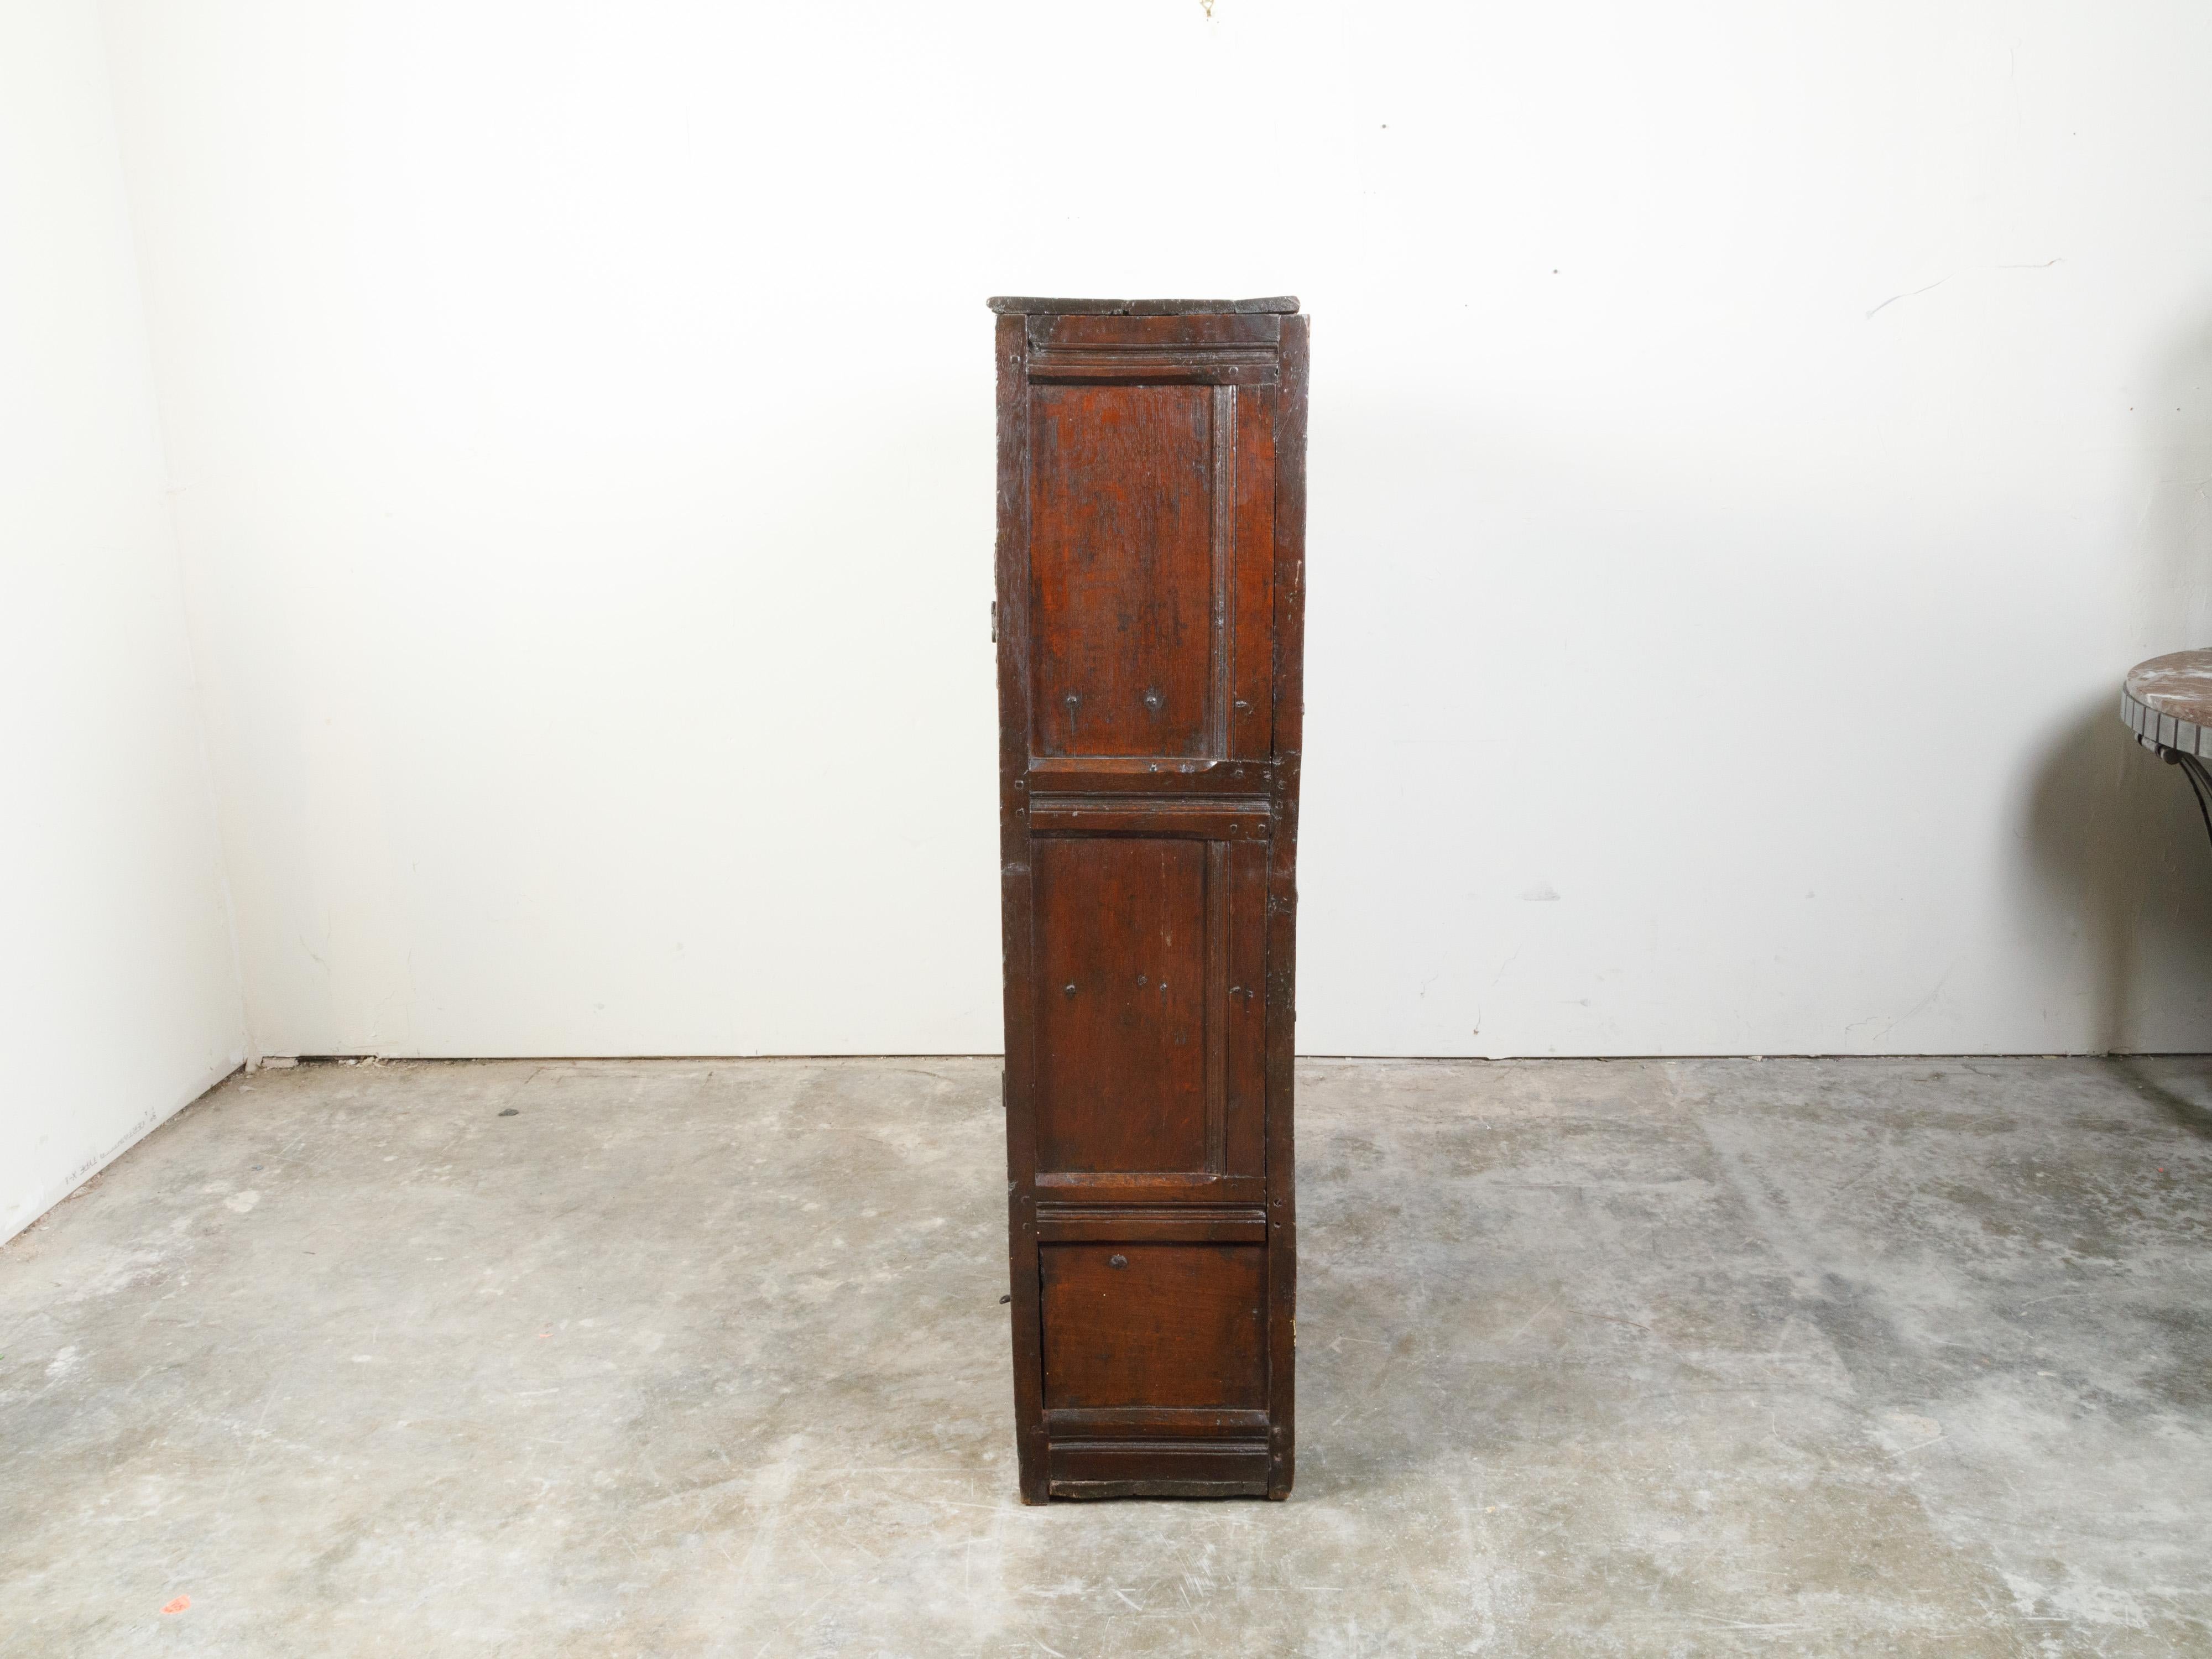 19th Century English 1800s Wooden Court Cupboard with Doors, Drawers and Diamond Motifs For Sale